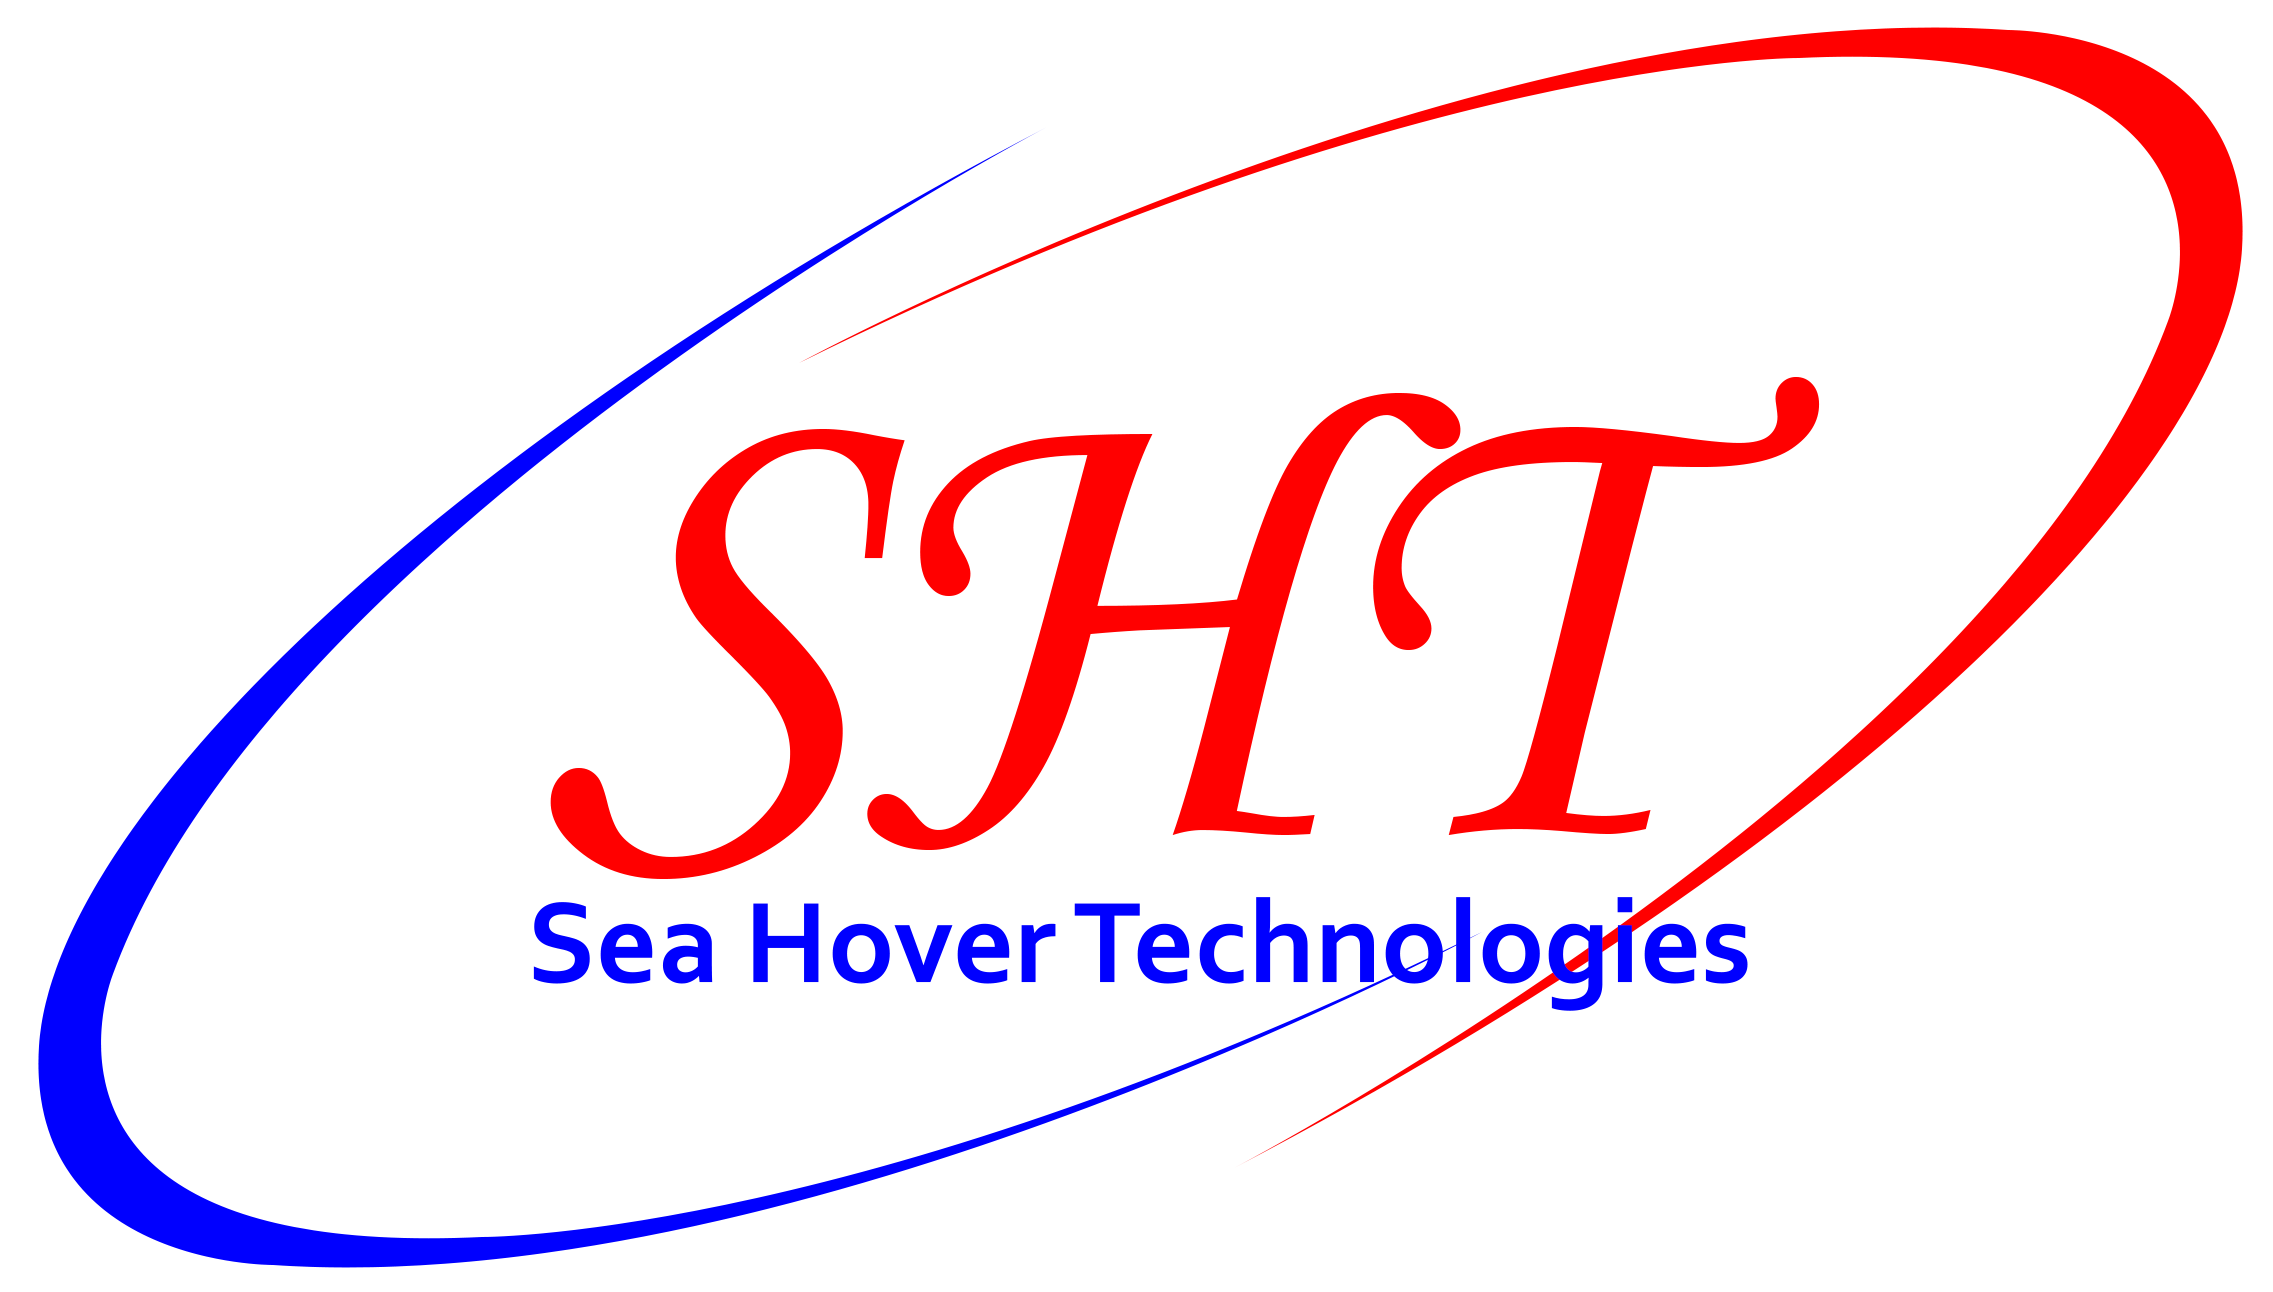 INTRODUCTION SHT2002 UTI TAPE FOR EUROPE MARKET AT SMM 2018